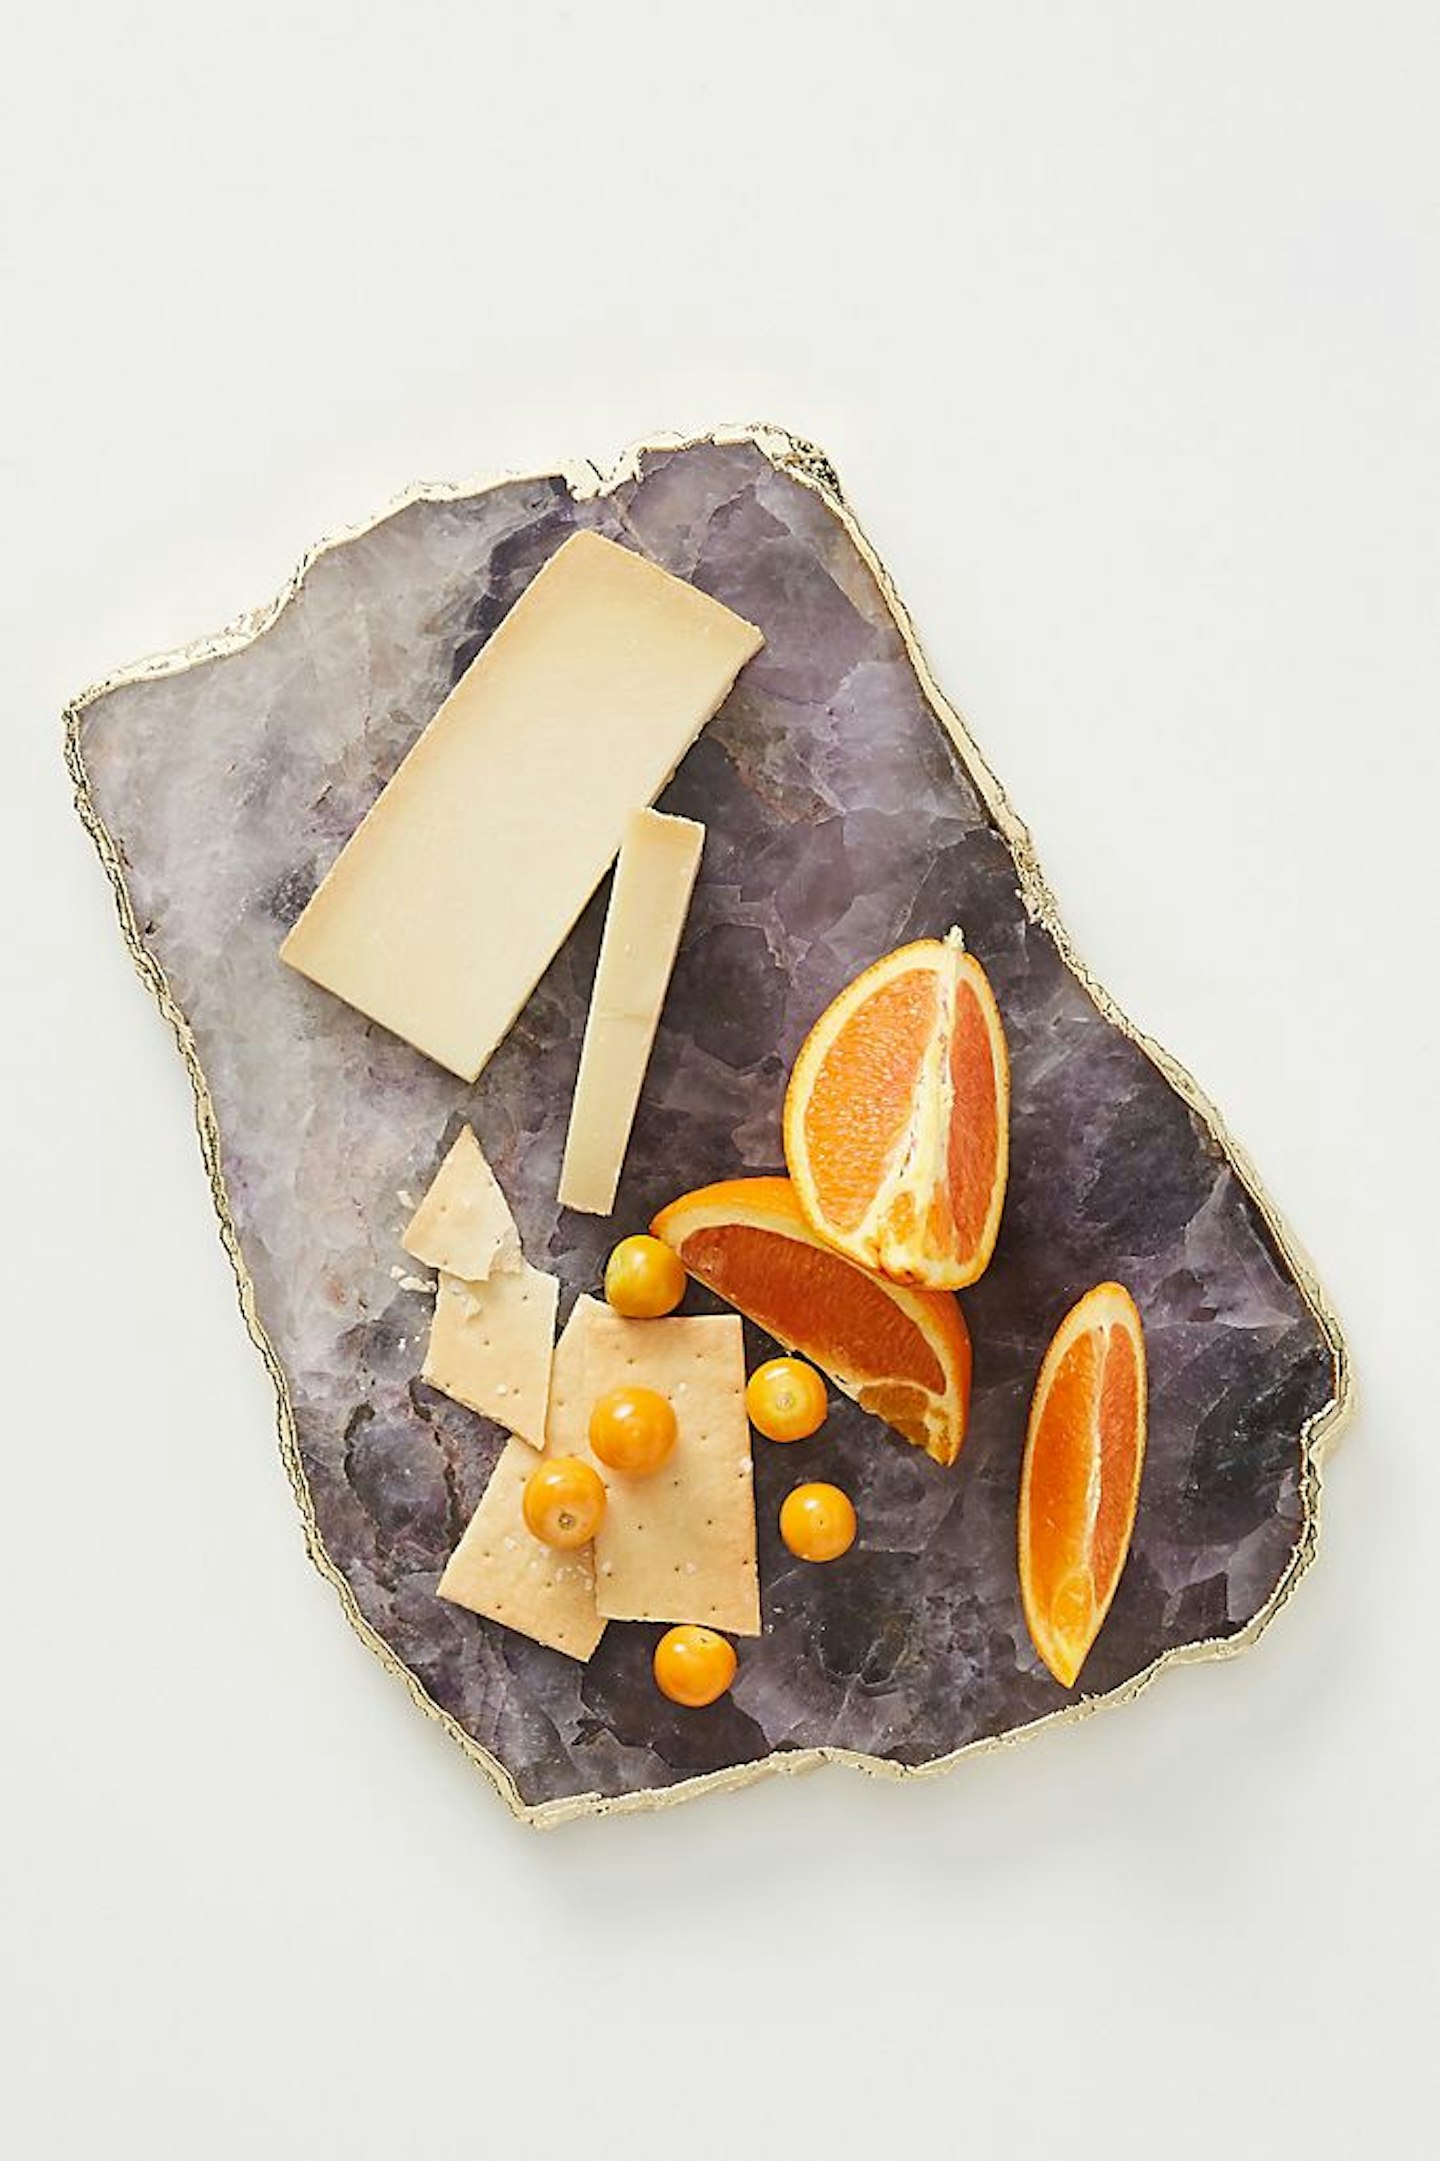 Anthropologie, Zaire Agate Cheese Board, £68.00